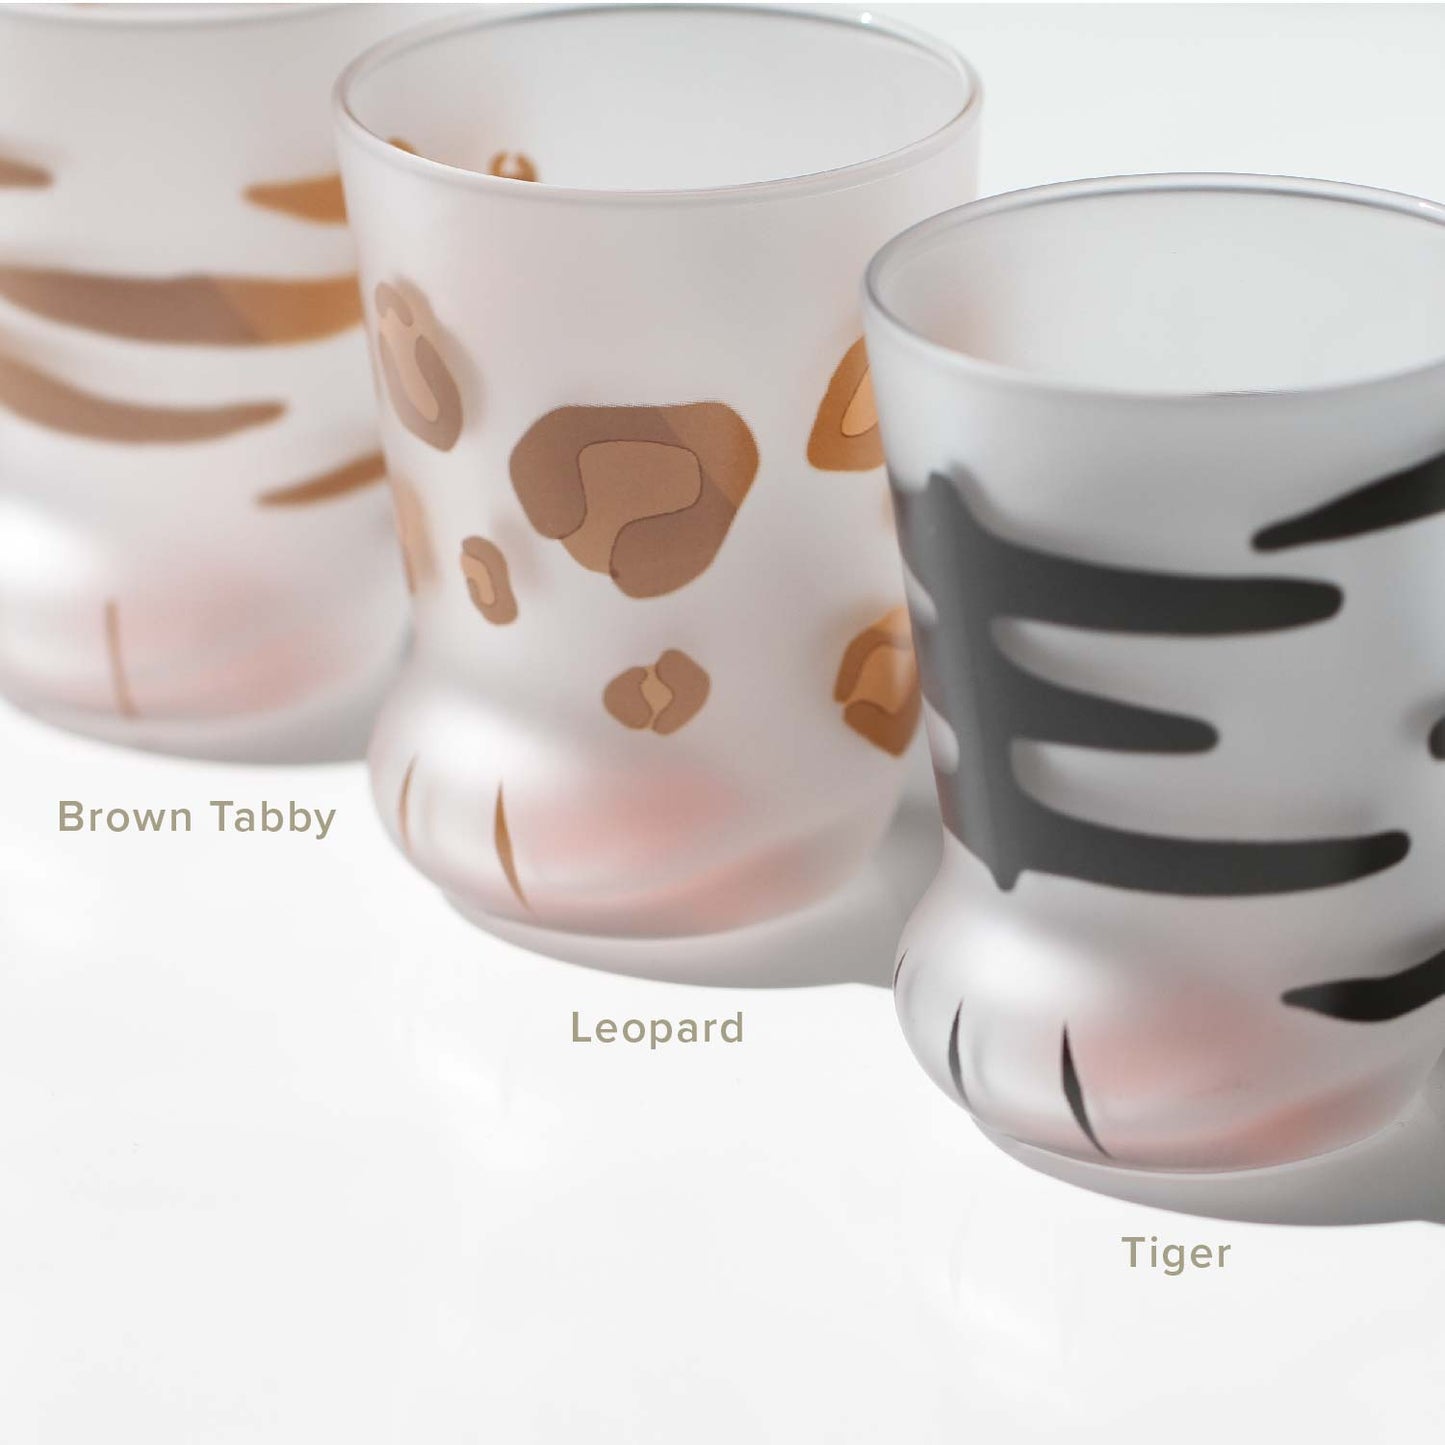 Kitten Paw Frosted Glass Cup